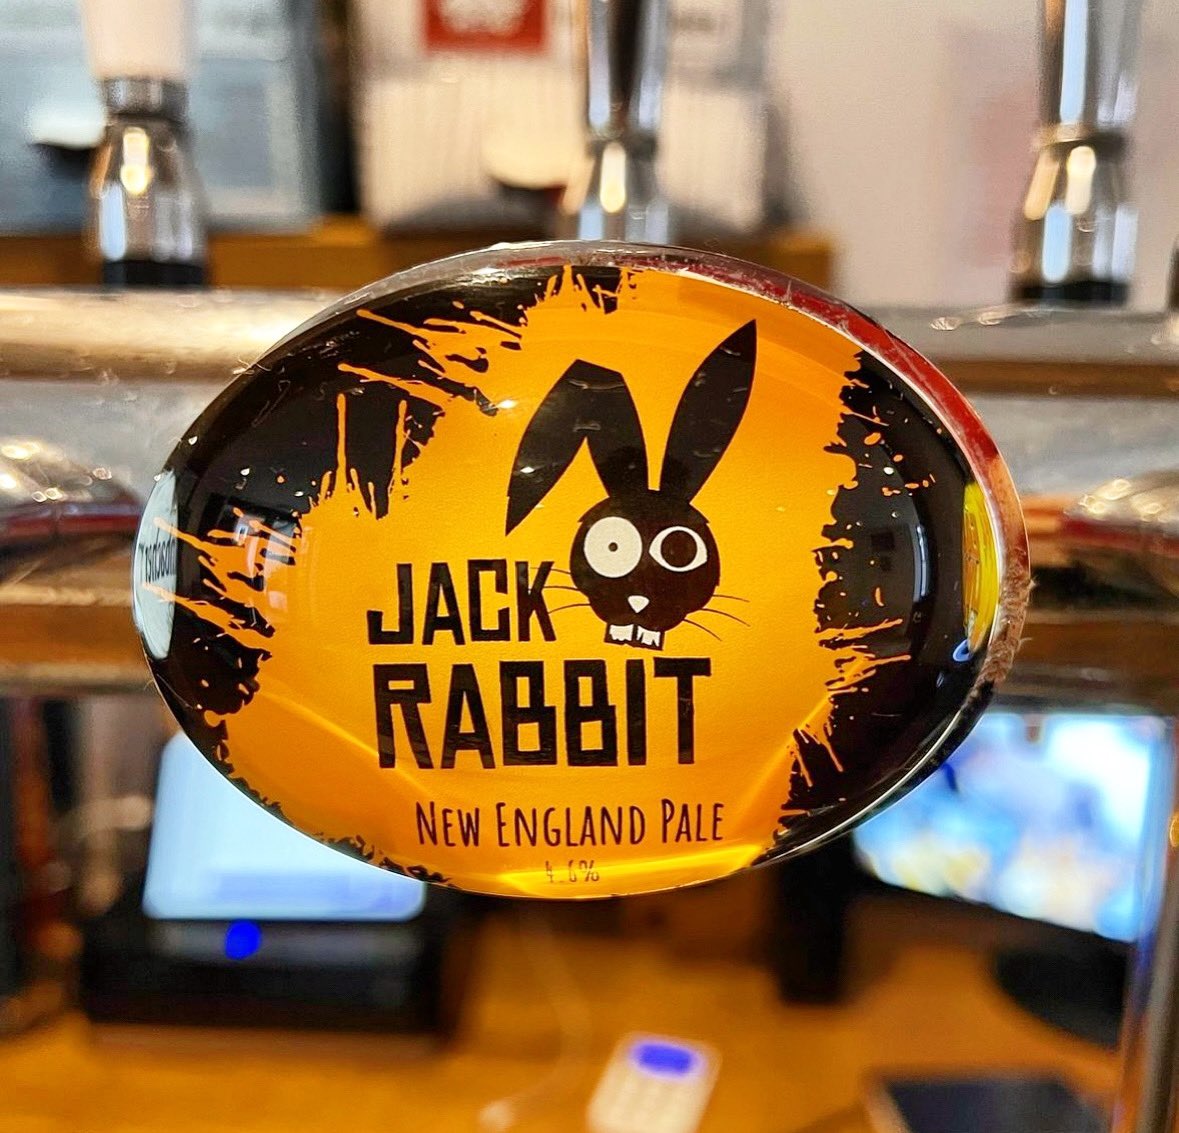 NEW in on tap 2 at The Magnet 🧲 

@jackrabbit_brewing_co 
• New England Pale (4.6%) 🐇 

#magnetcolchester
#colchesterbusiness 
#colchesterpub
#colchester
#essexpub
#jackrabbitbrewing 
#newenglandpale
#micropub